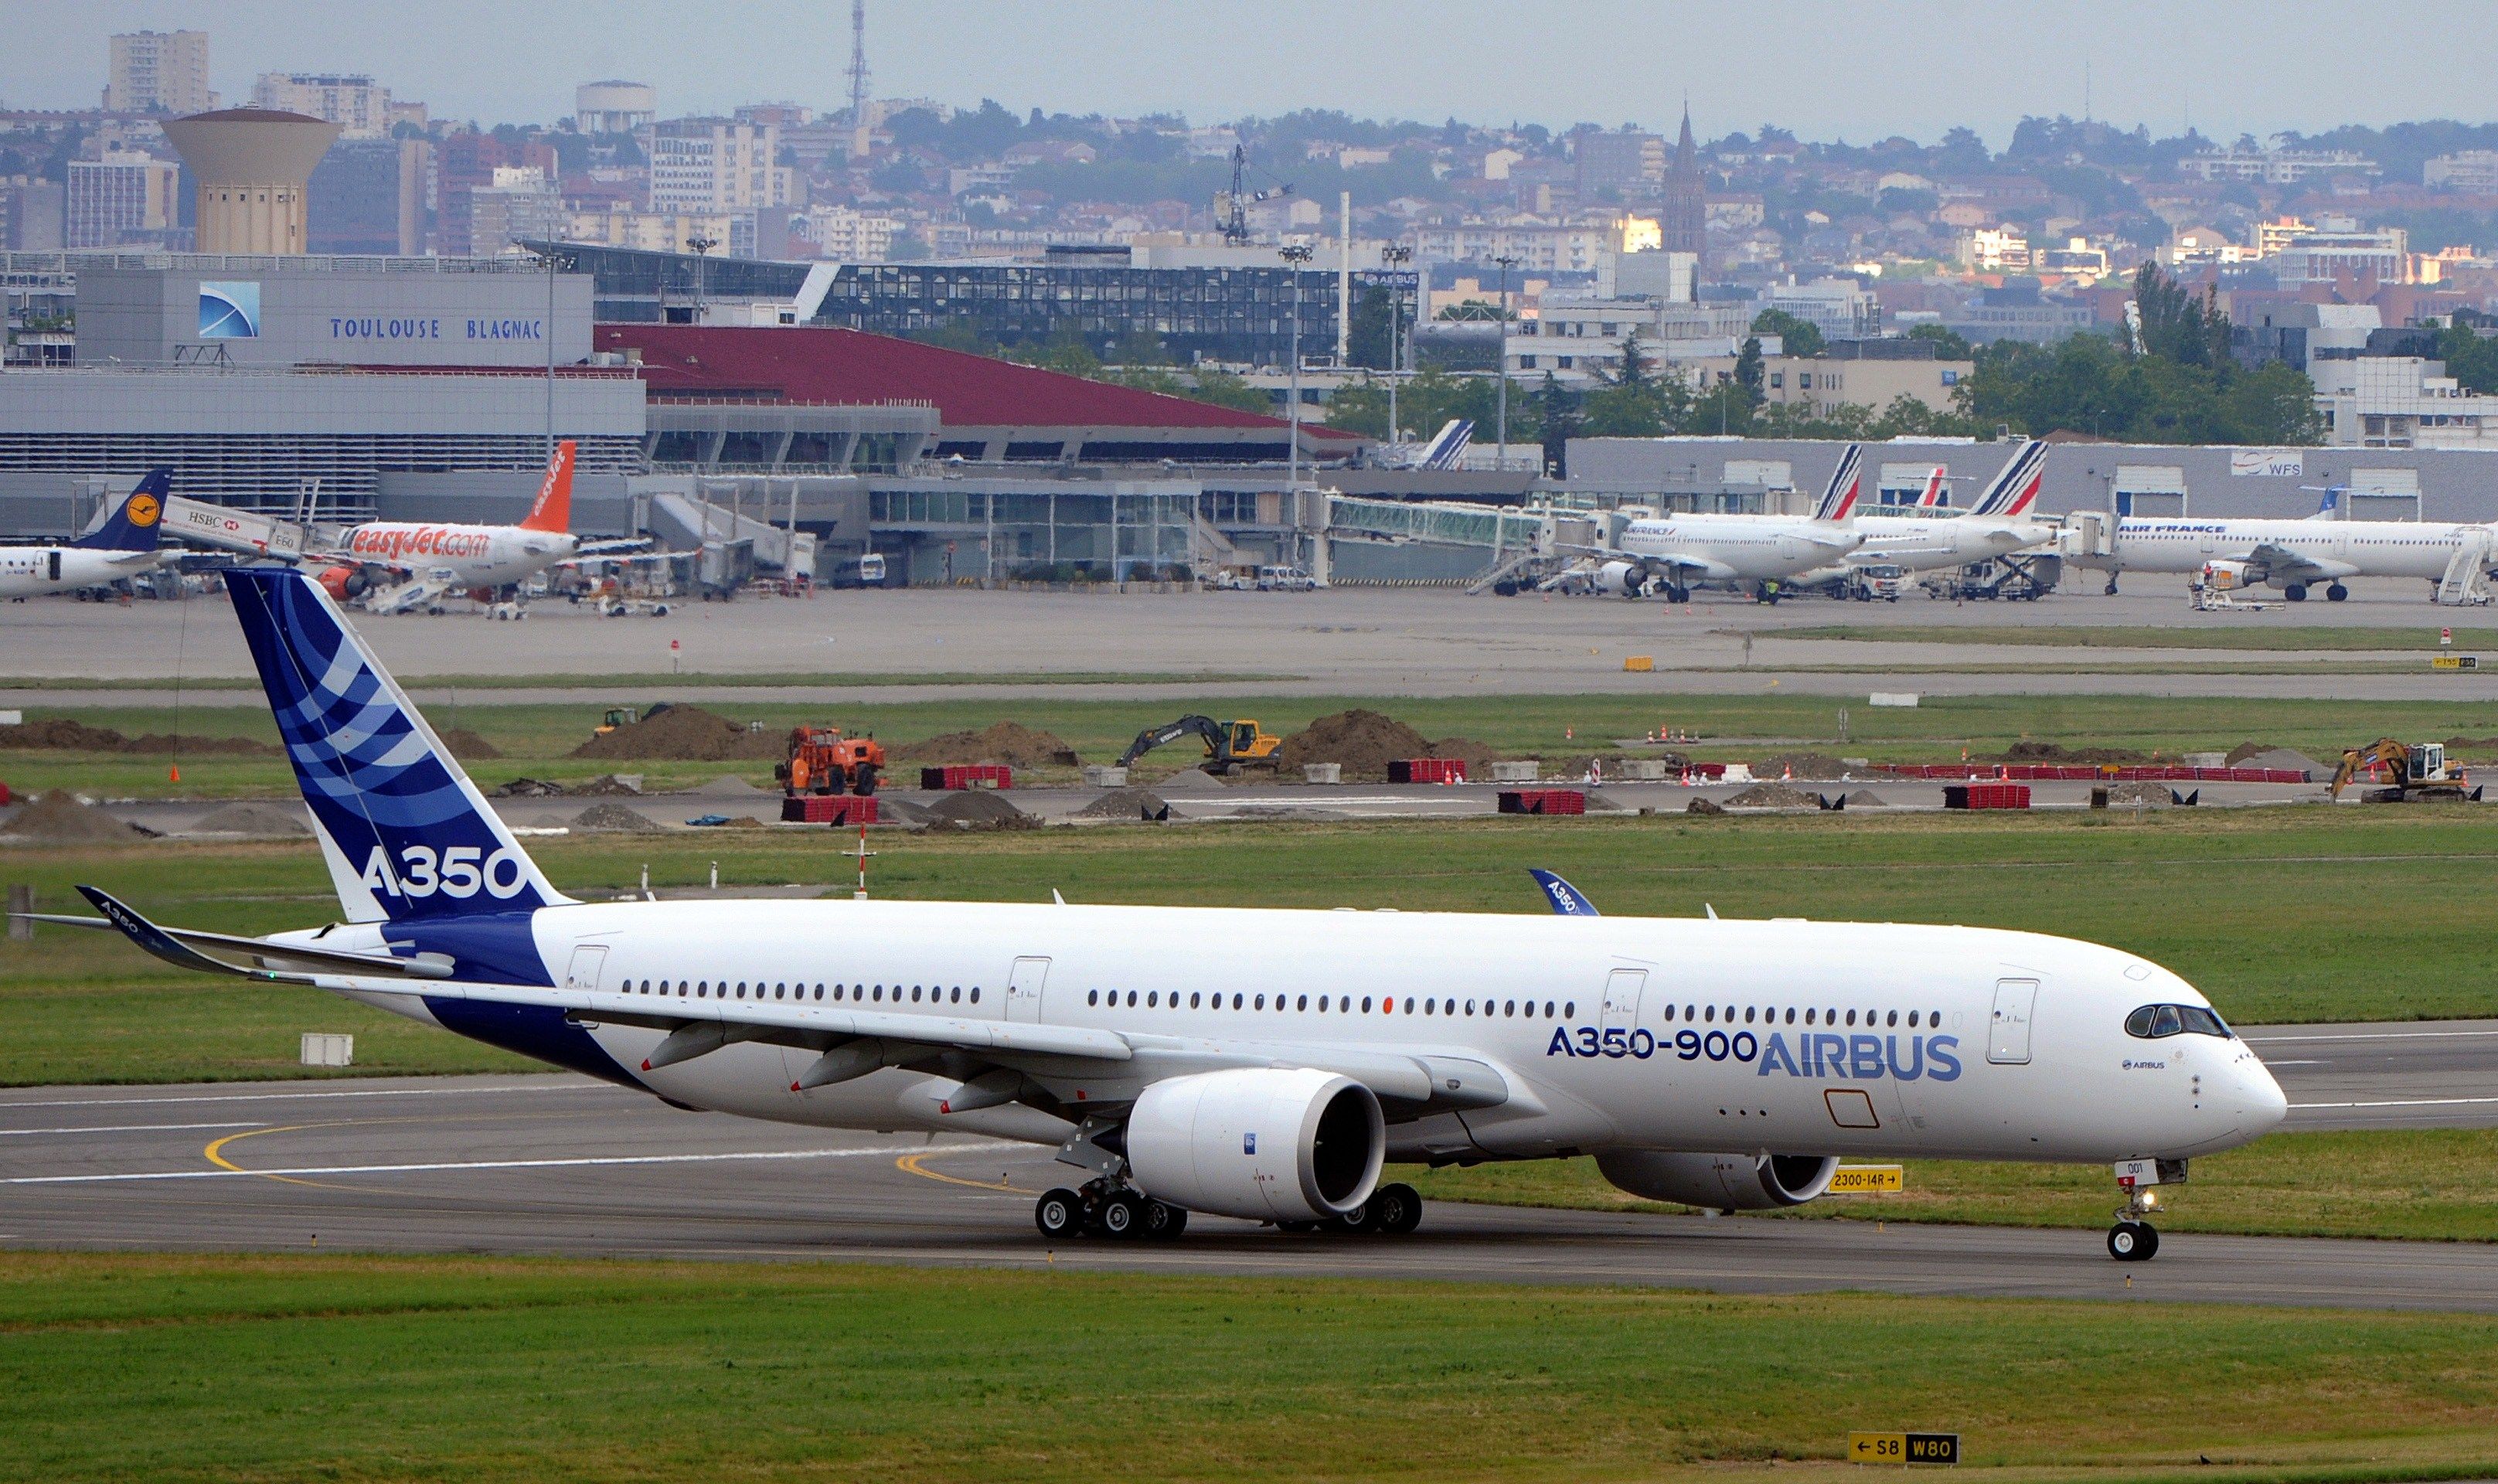 3232x1920px 1474.07 KB Airbus A350